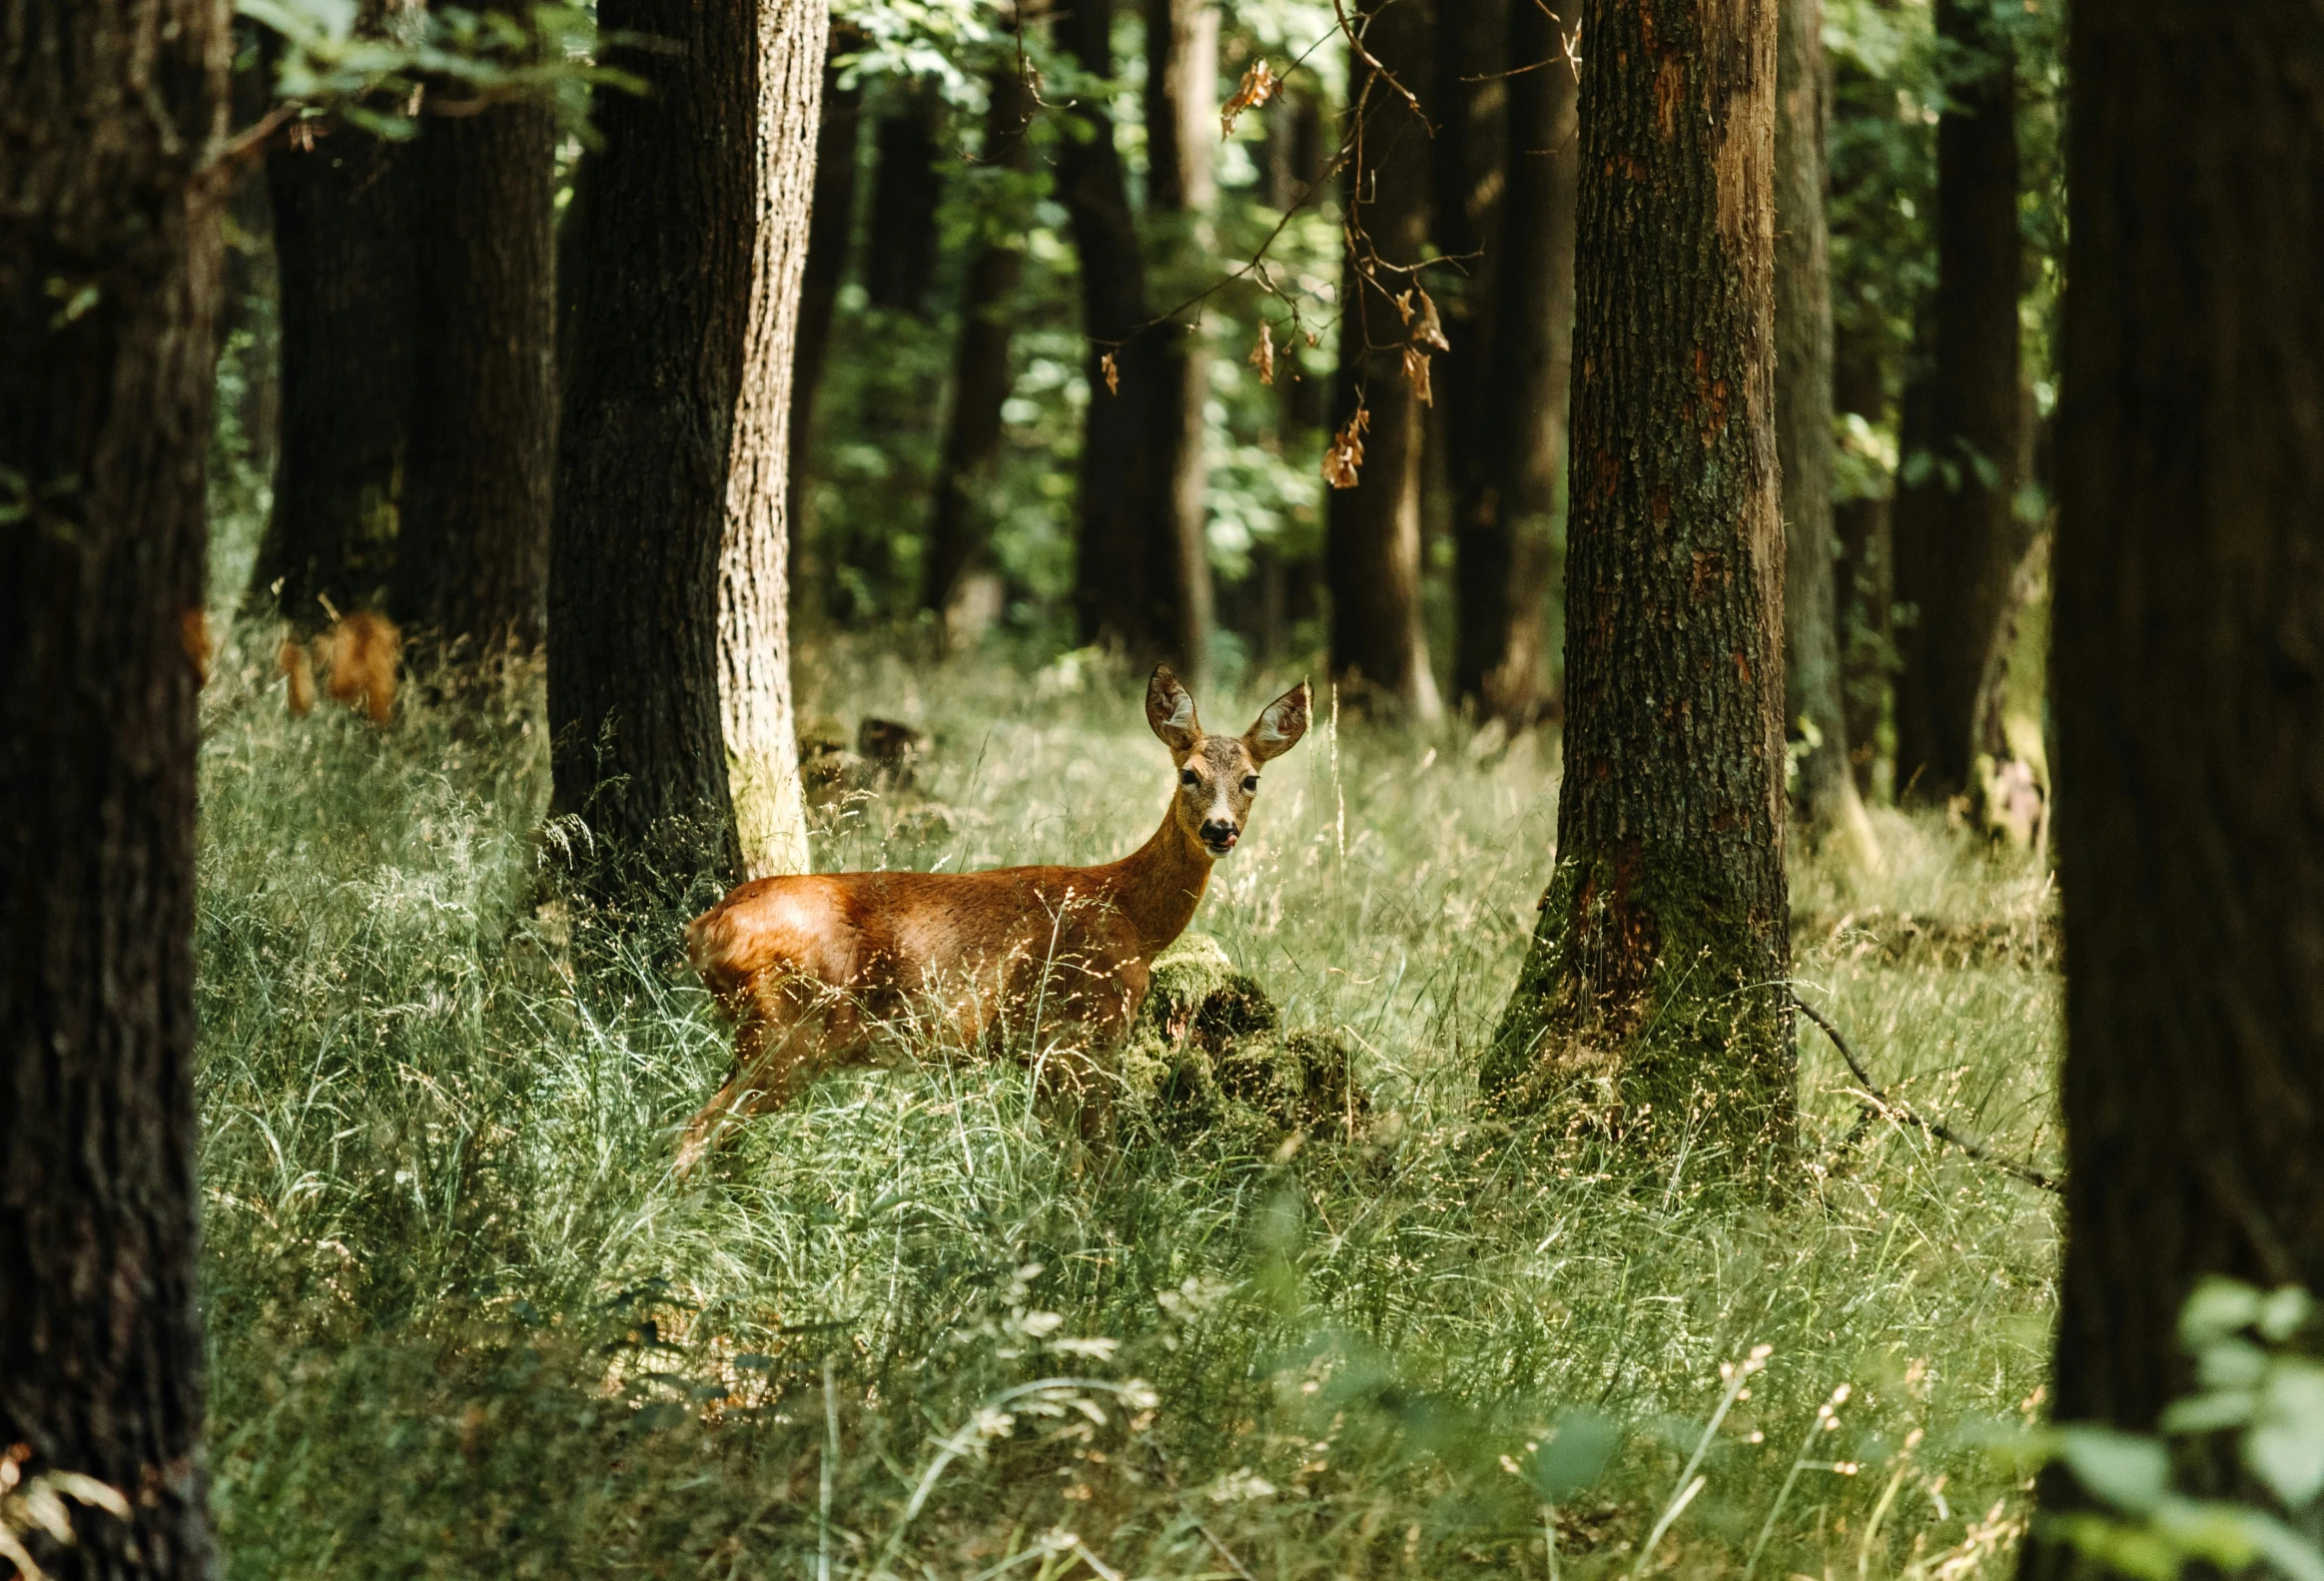 a deer standing in a grassy forest with lots of trees